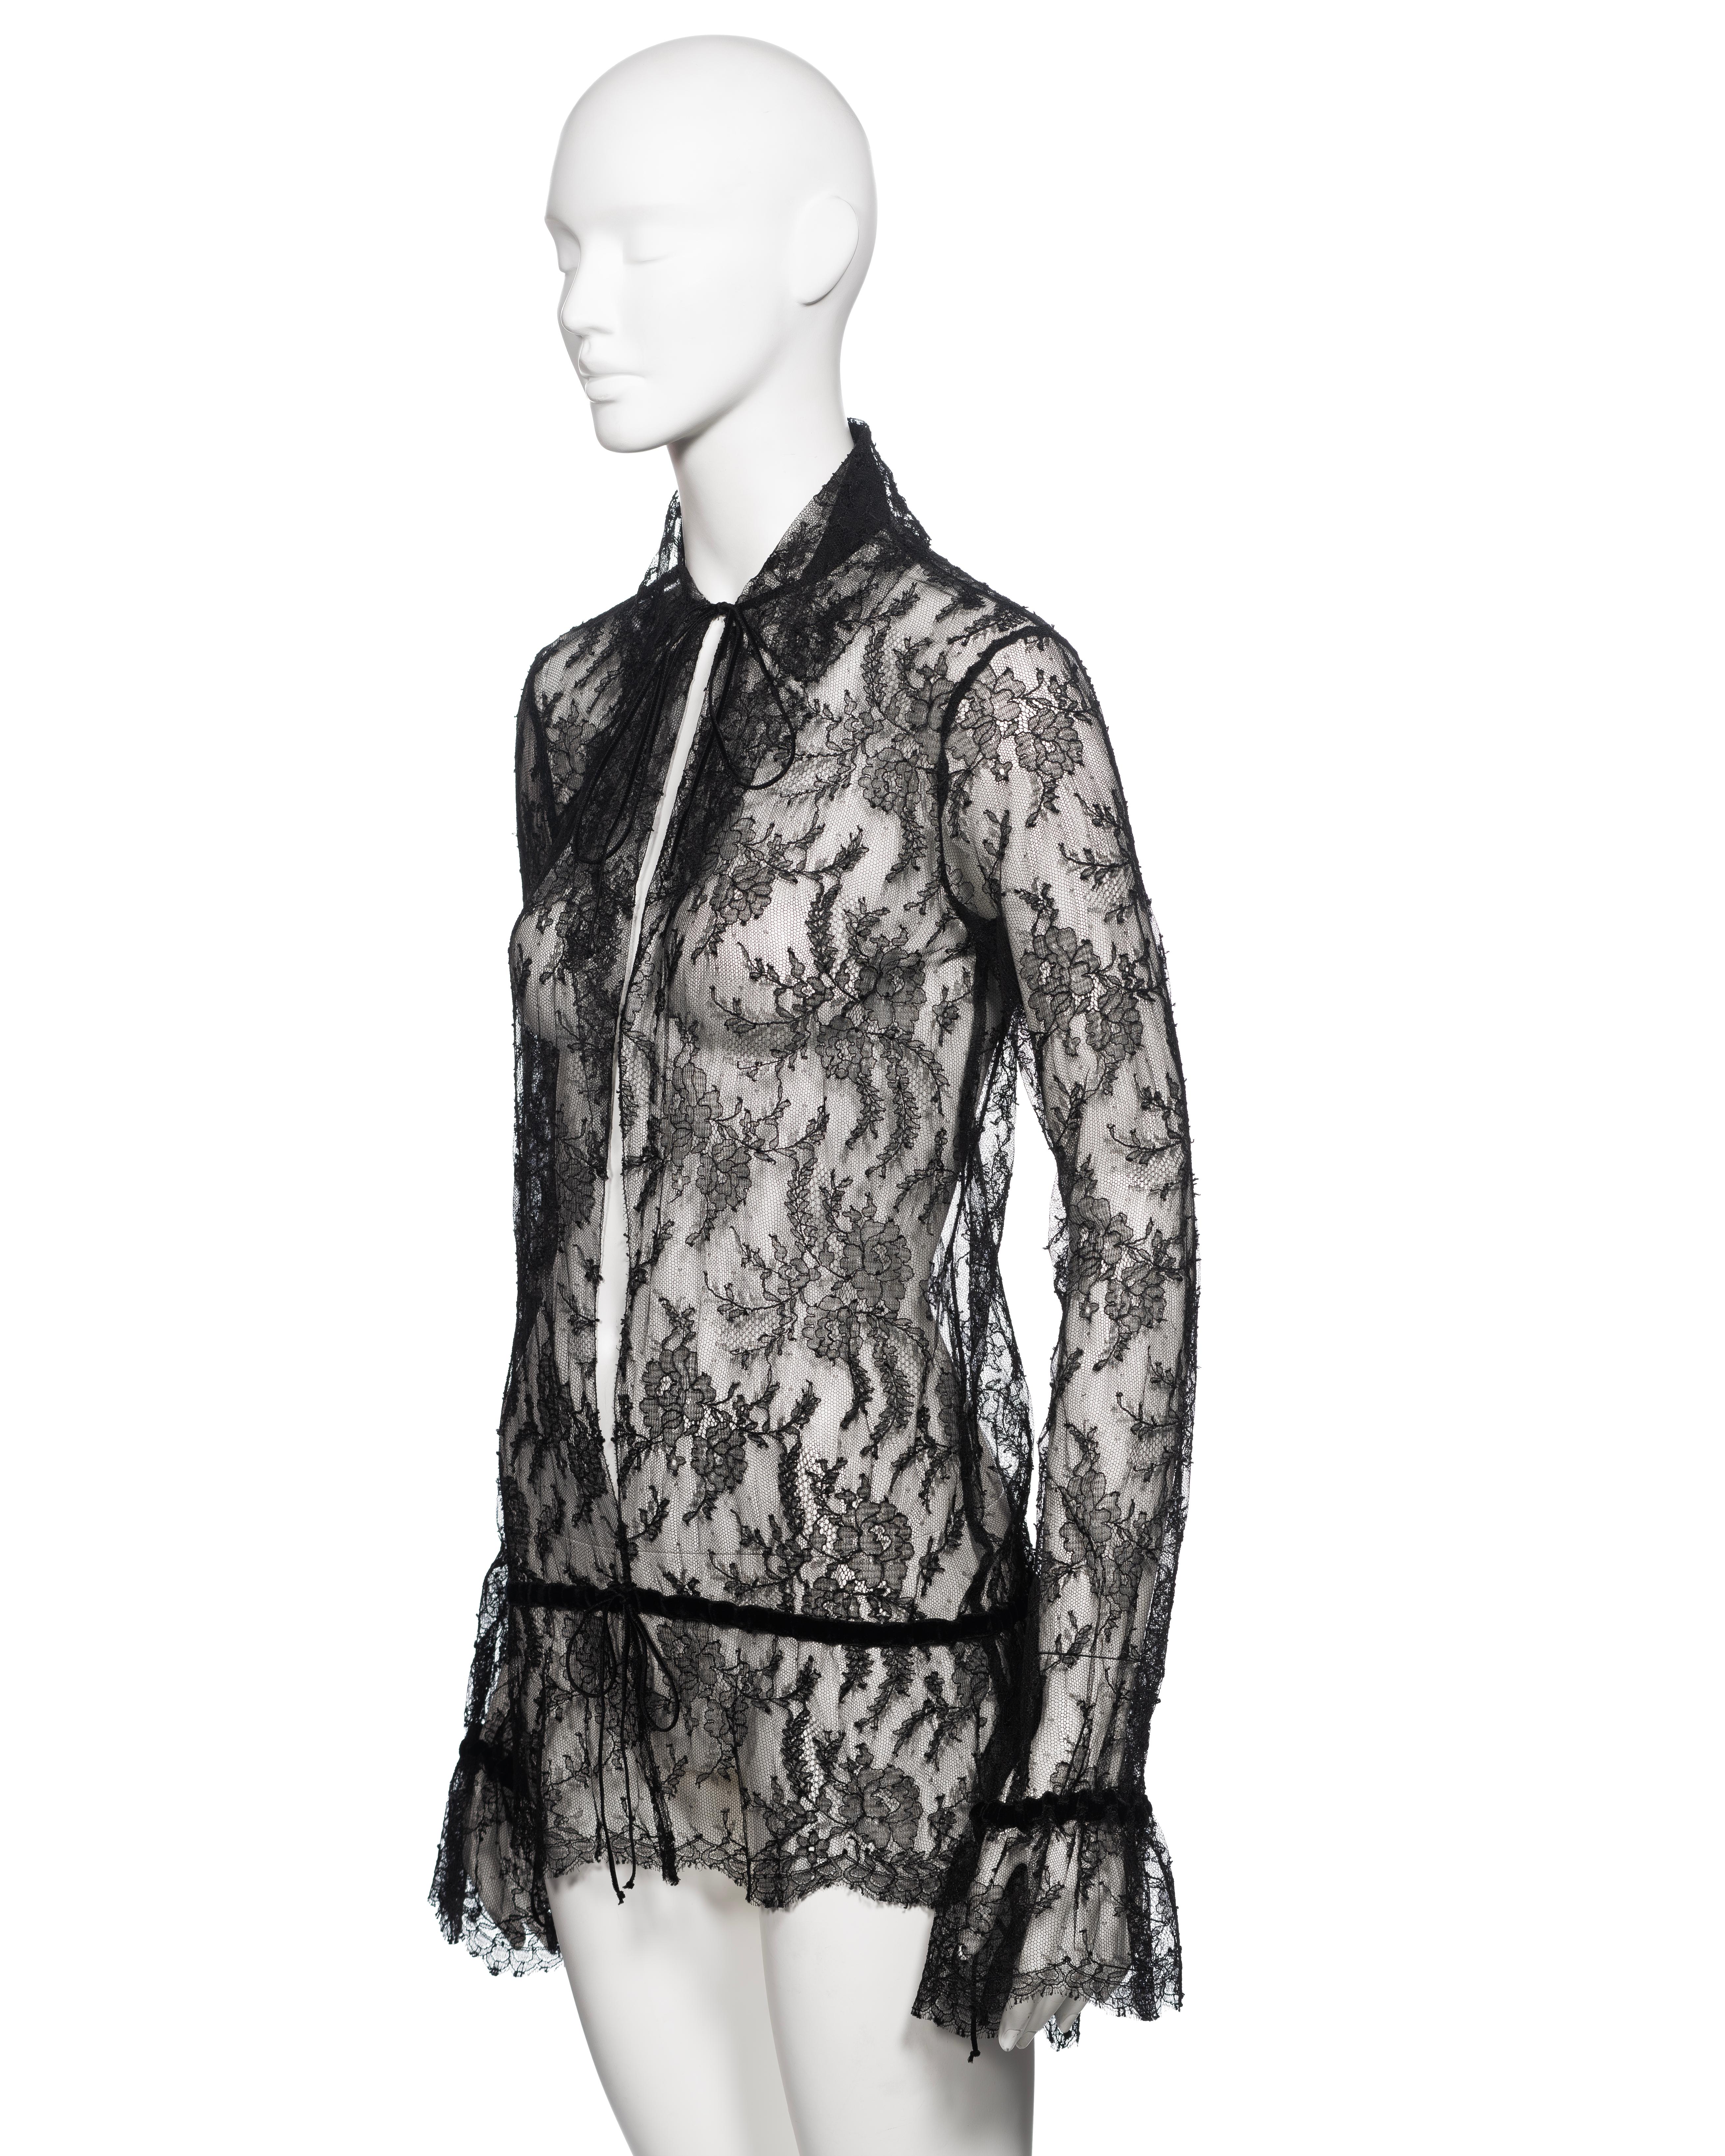 Chanel by Karl Lagerfeld Black Lace Blouse with Velvet Ribbon Trim, FW 2004 4